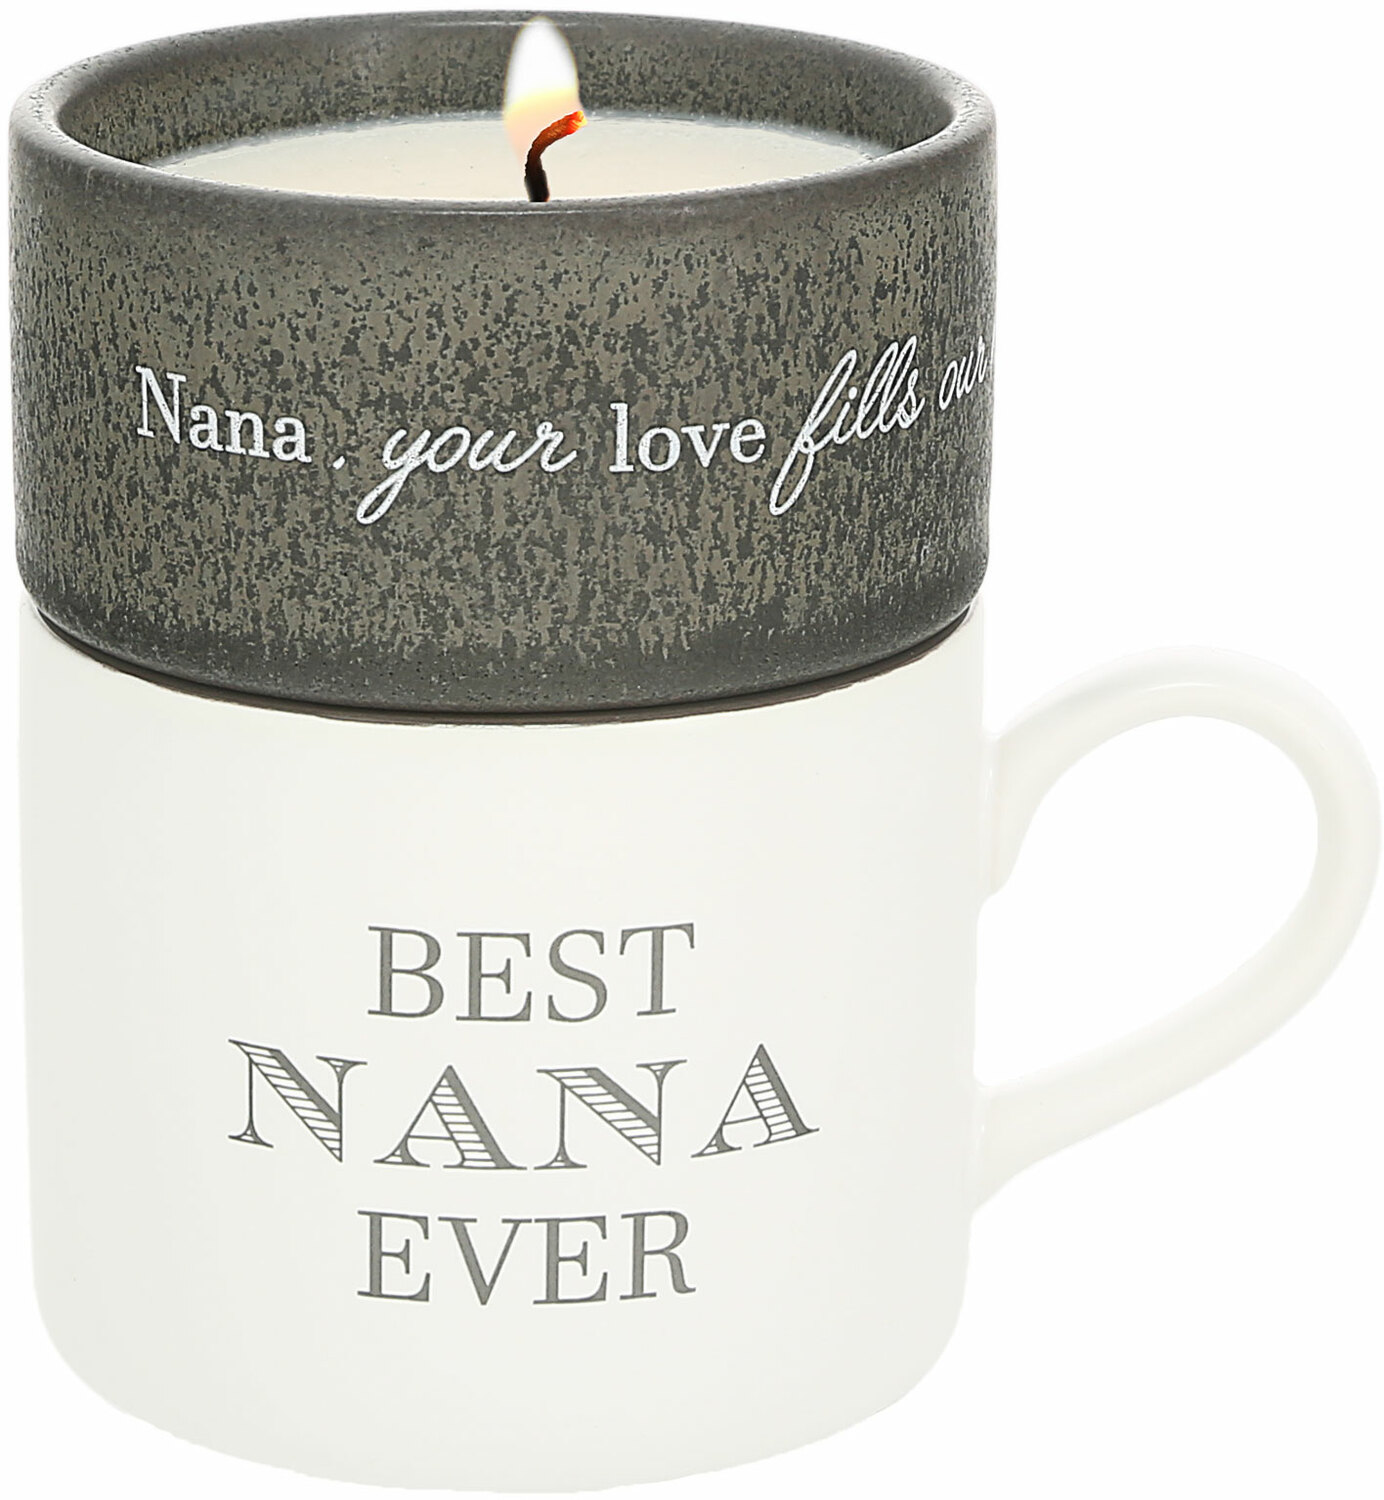 Nana by Filled with Warmth - Nana - Stacking Mug and Candle Set
100% Soy Wax Scent: Tranquility